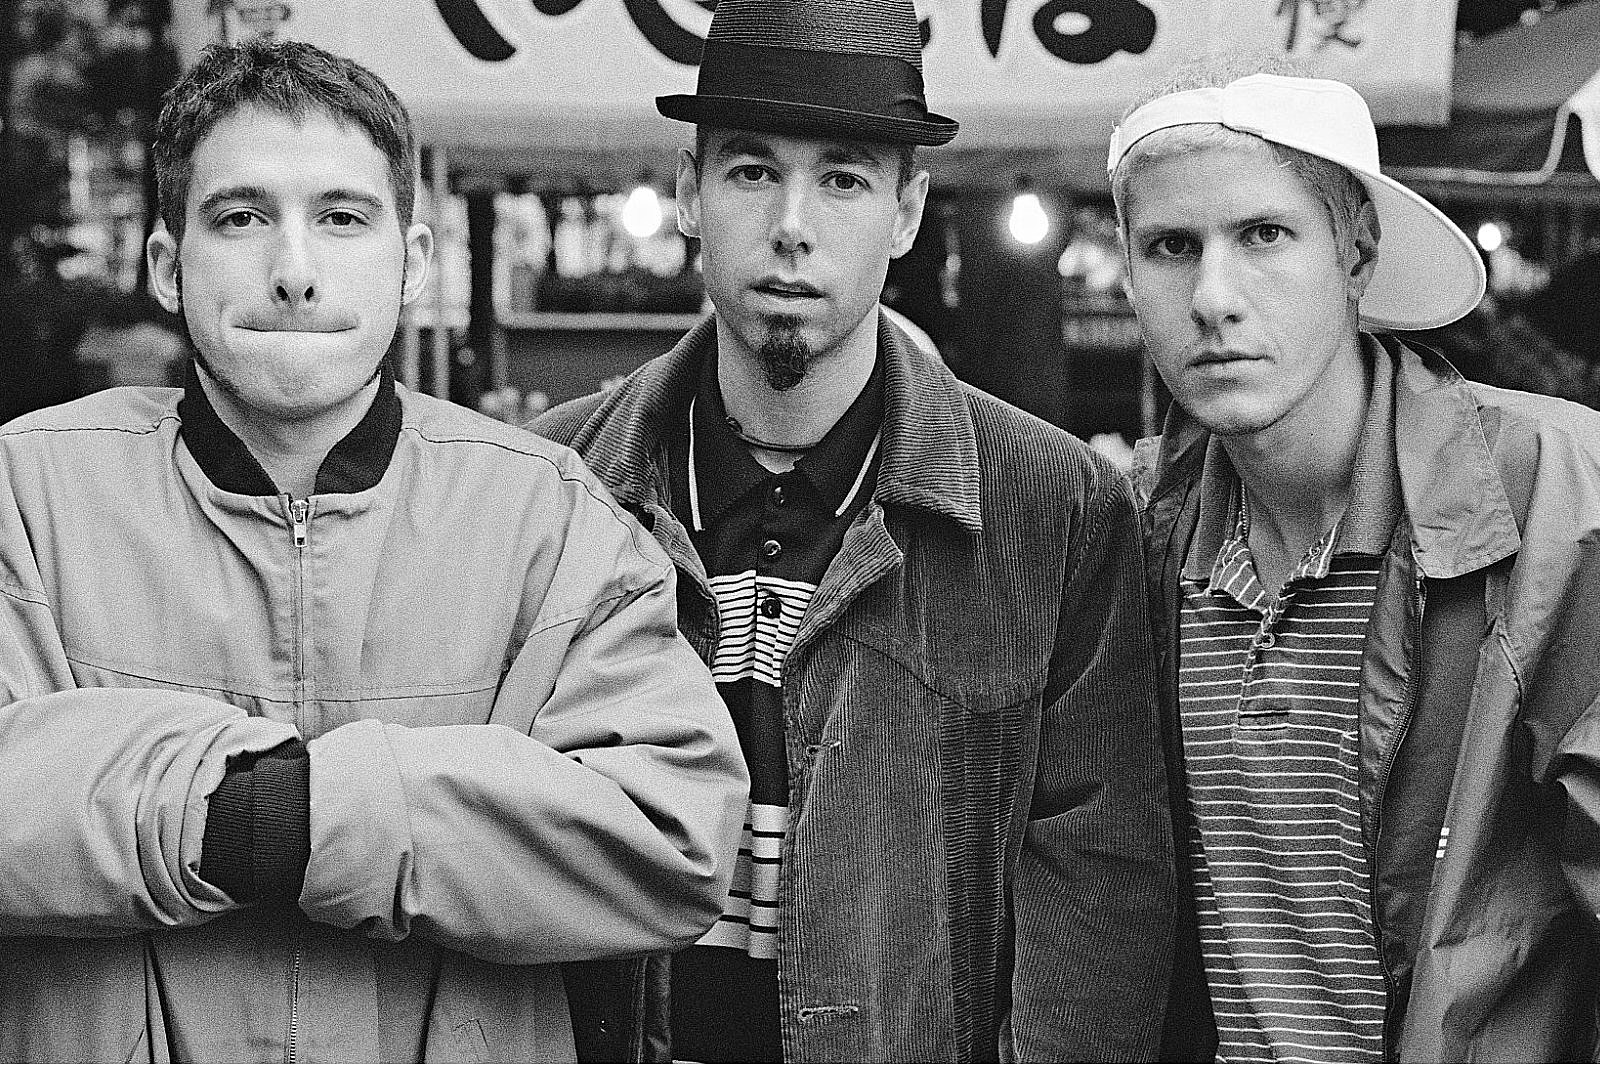 Black and white photo of the Beastie Boys in 1994